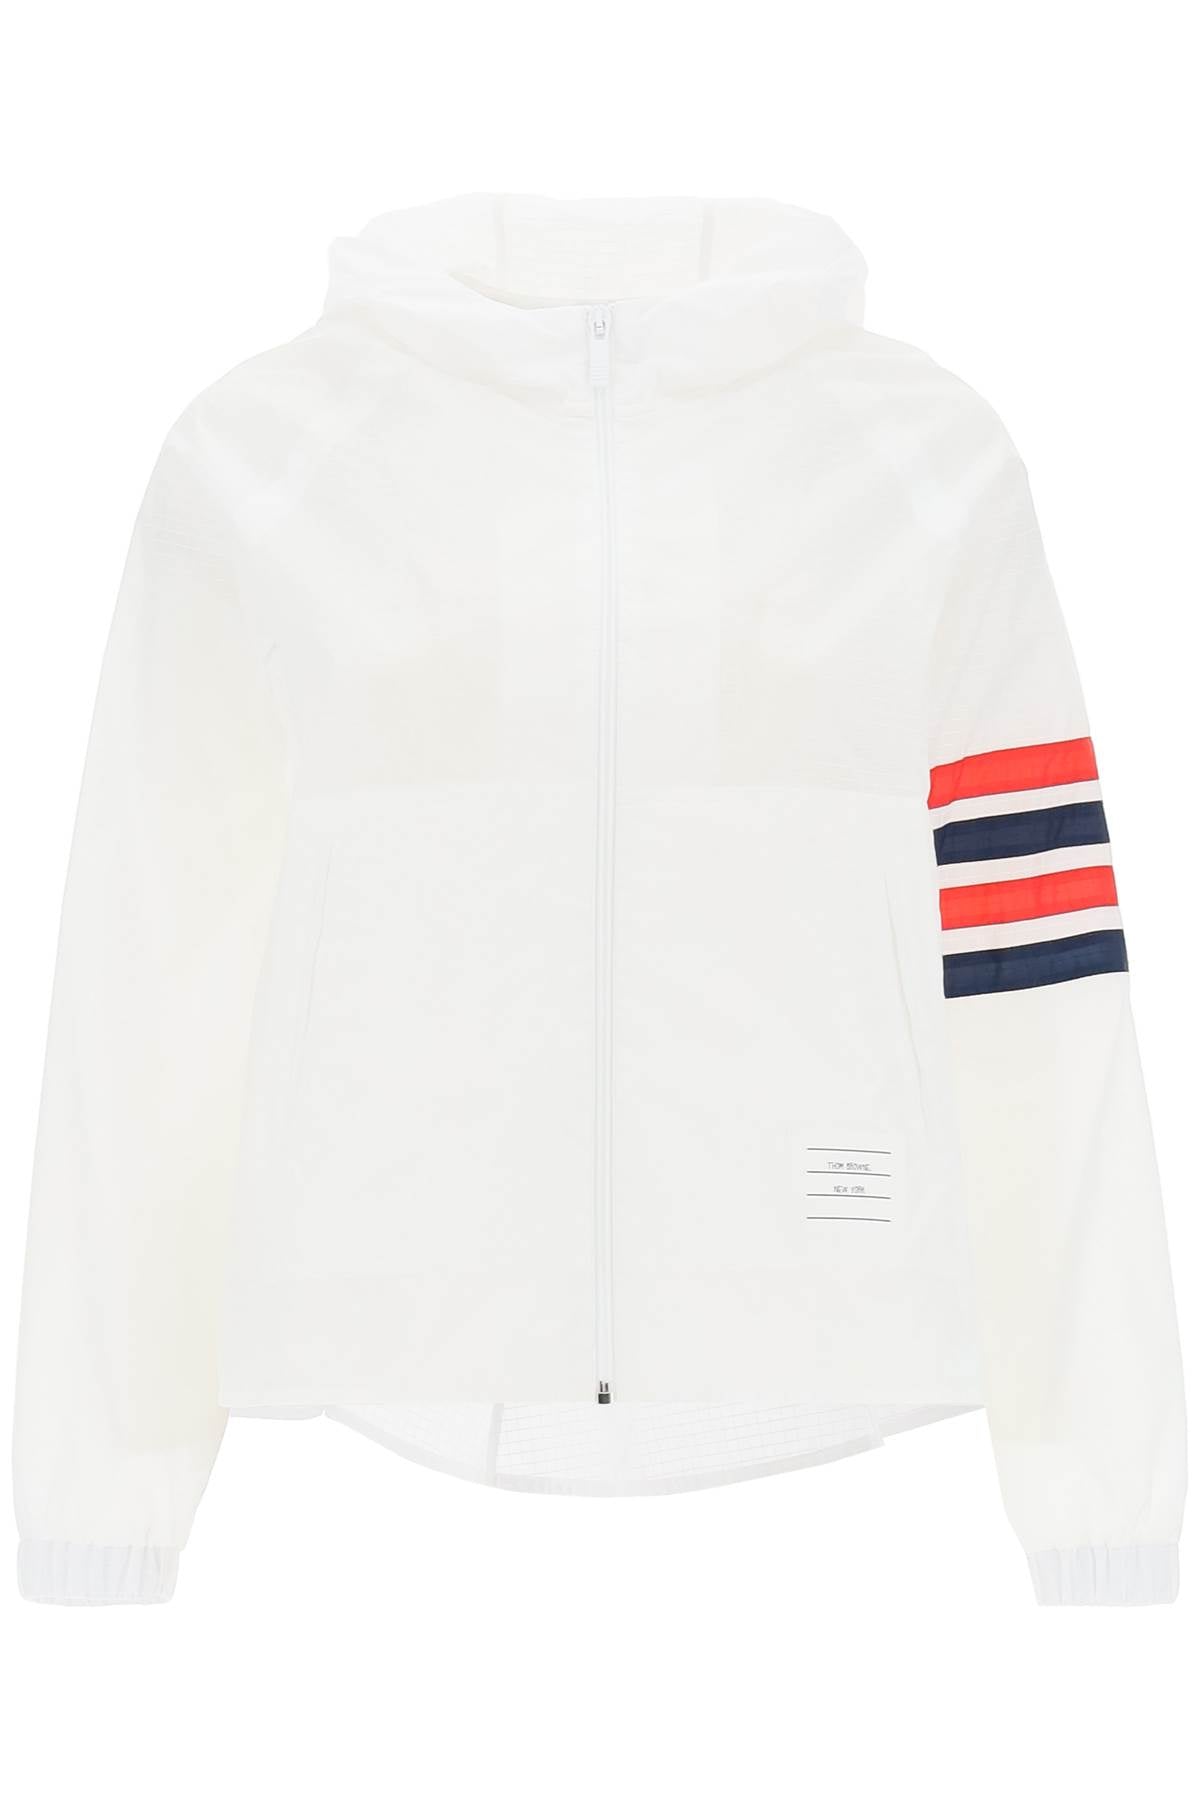 THOM BROWNE Hooded Ripstop Jacket with 4-Bar Motif for Women